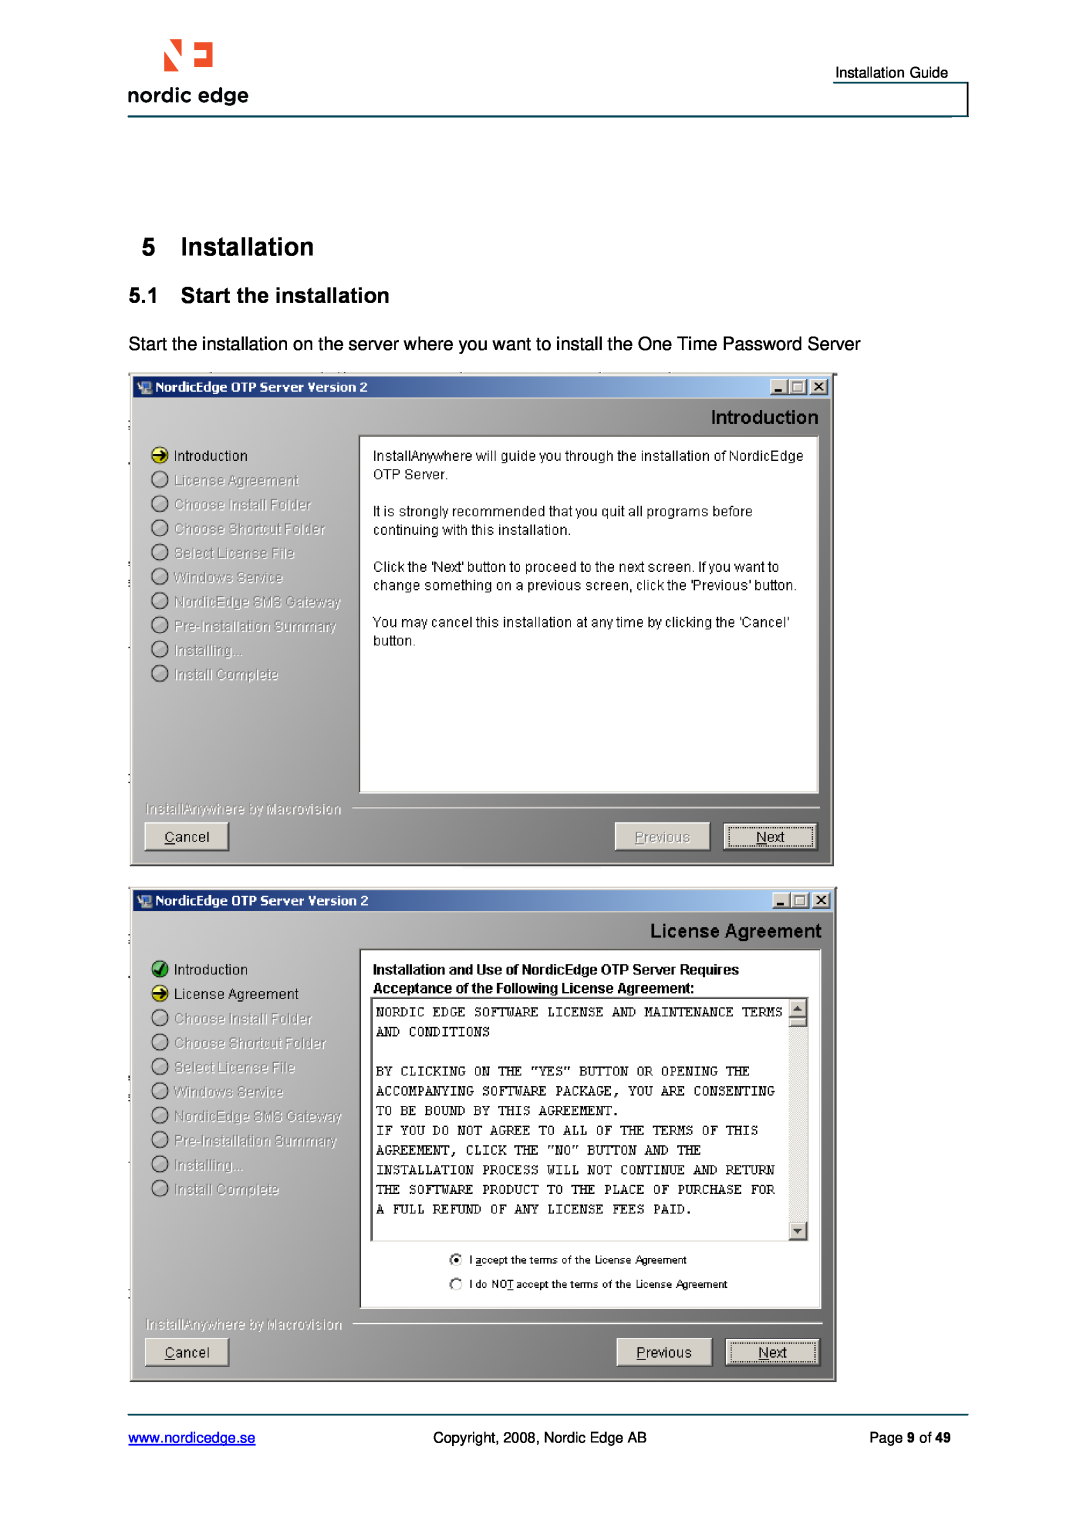 Cisco Systems ASA 5500 manual Installation Guide, Copyright, 2008, Nordic Edge AB, Page 9 of 